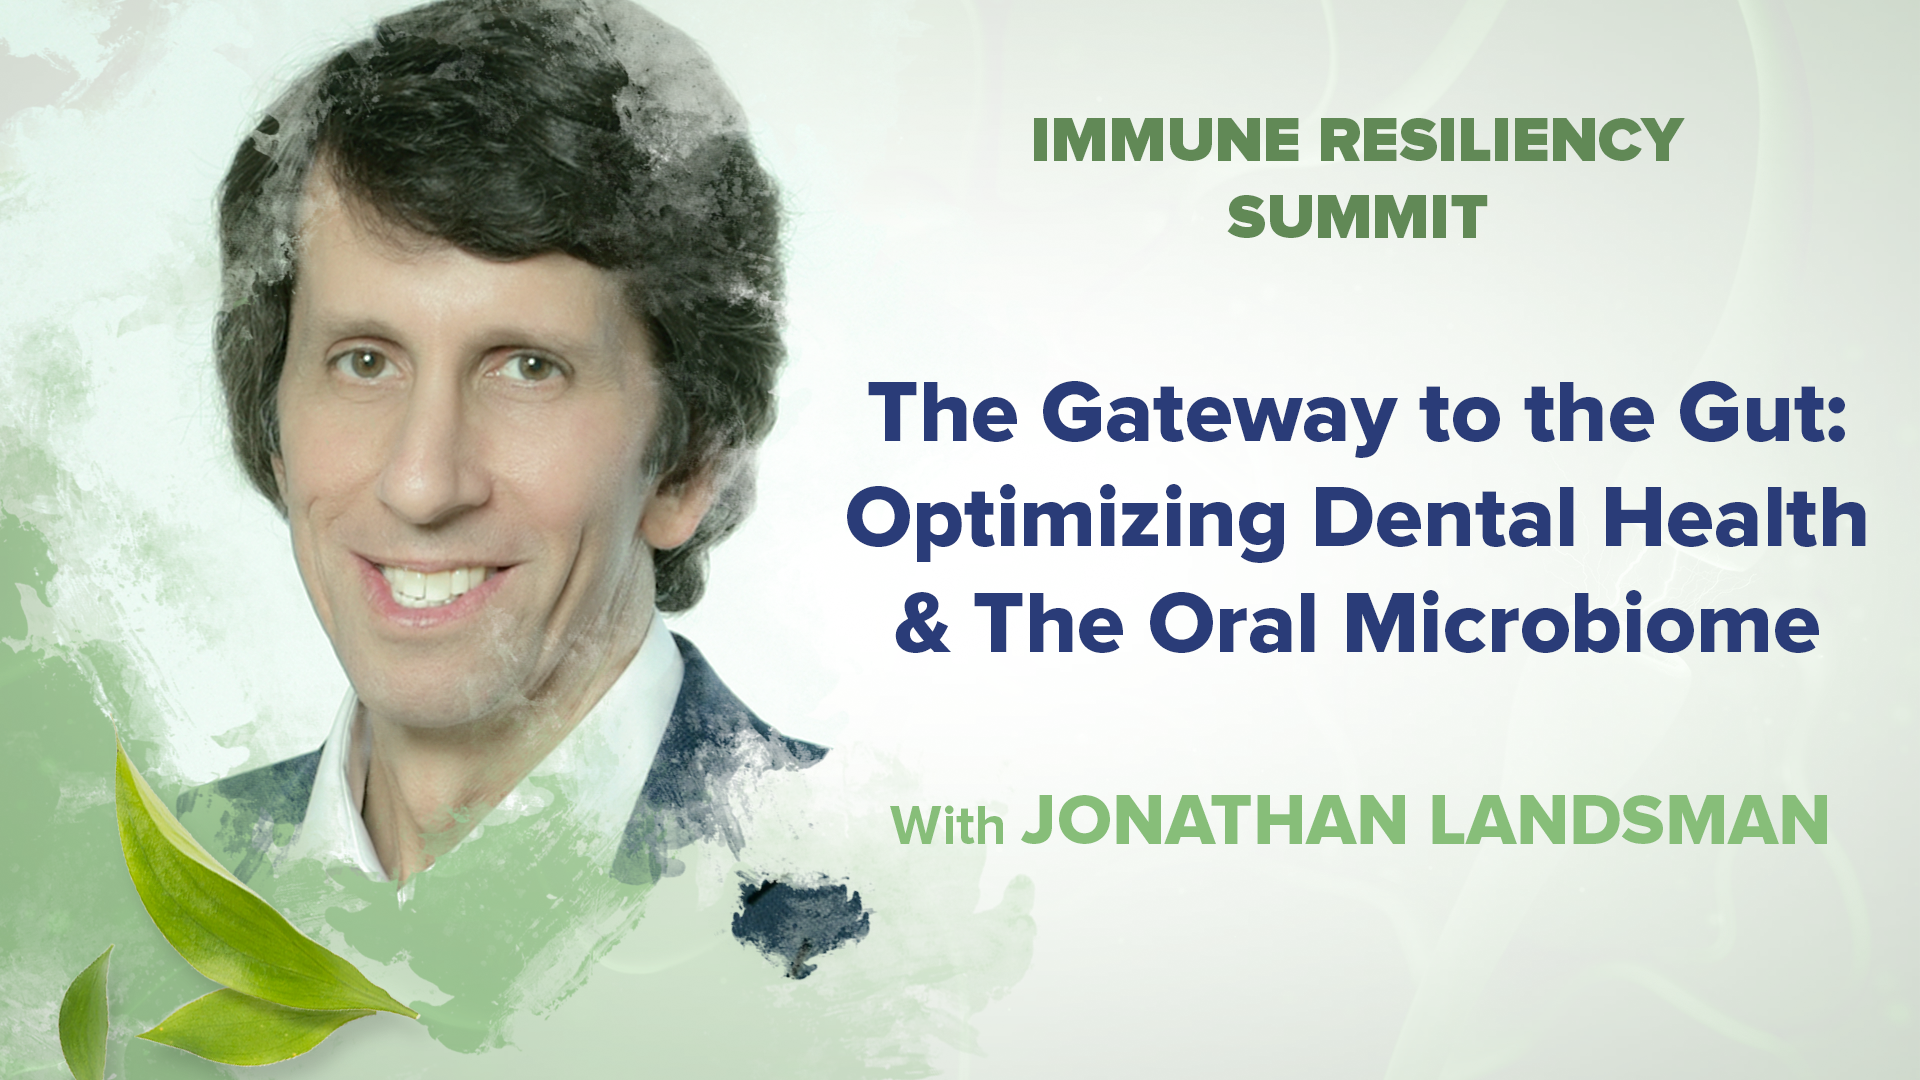 The Gateway to the Gut: Optimizing Dental Health & The Oral Microbiome